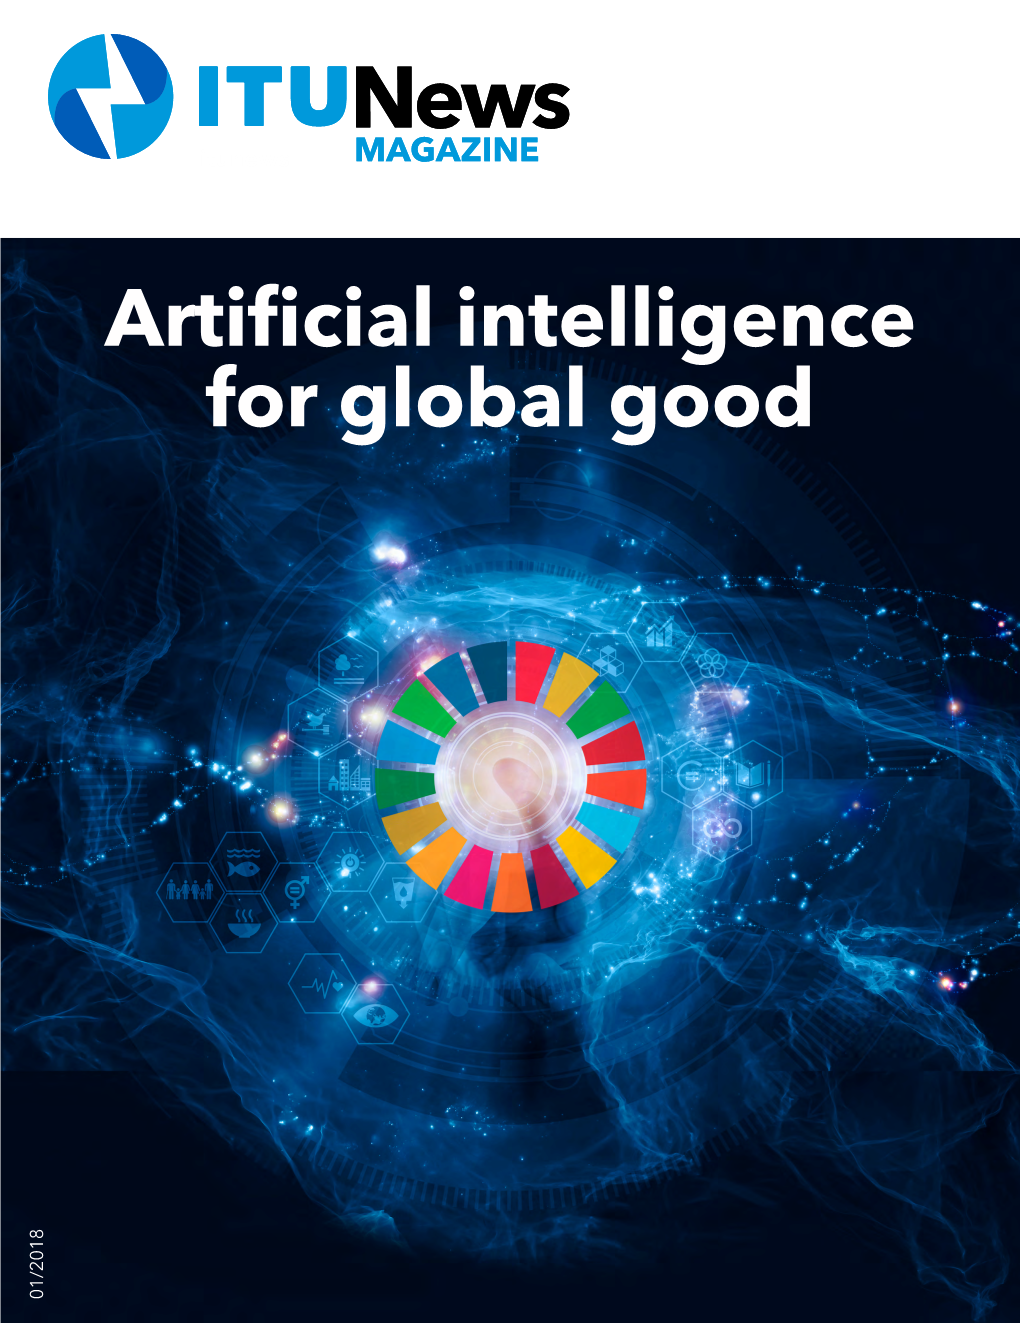 Artificial Intelligence for Global Good 01/2018 (Editorial)